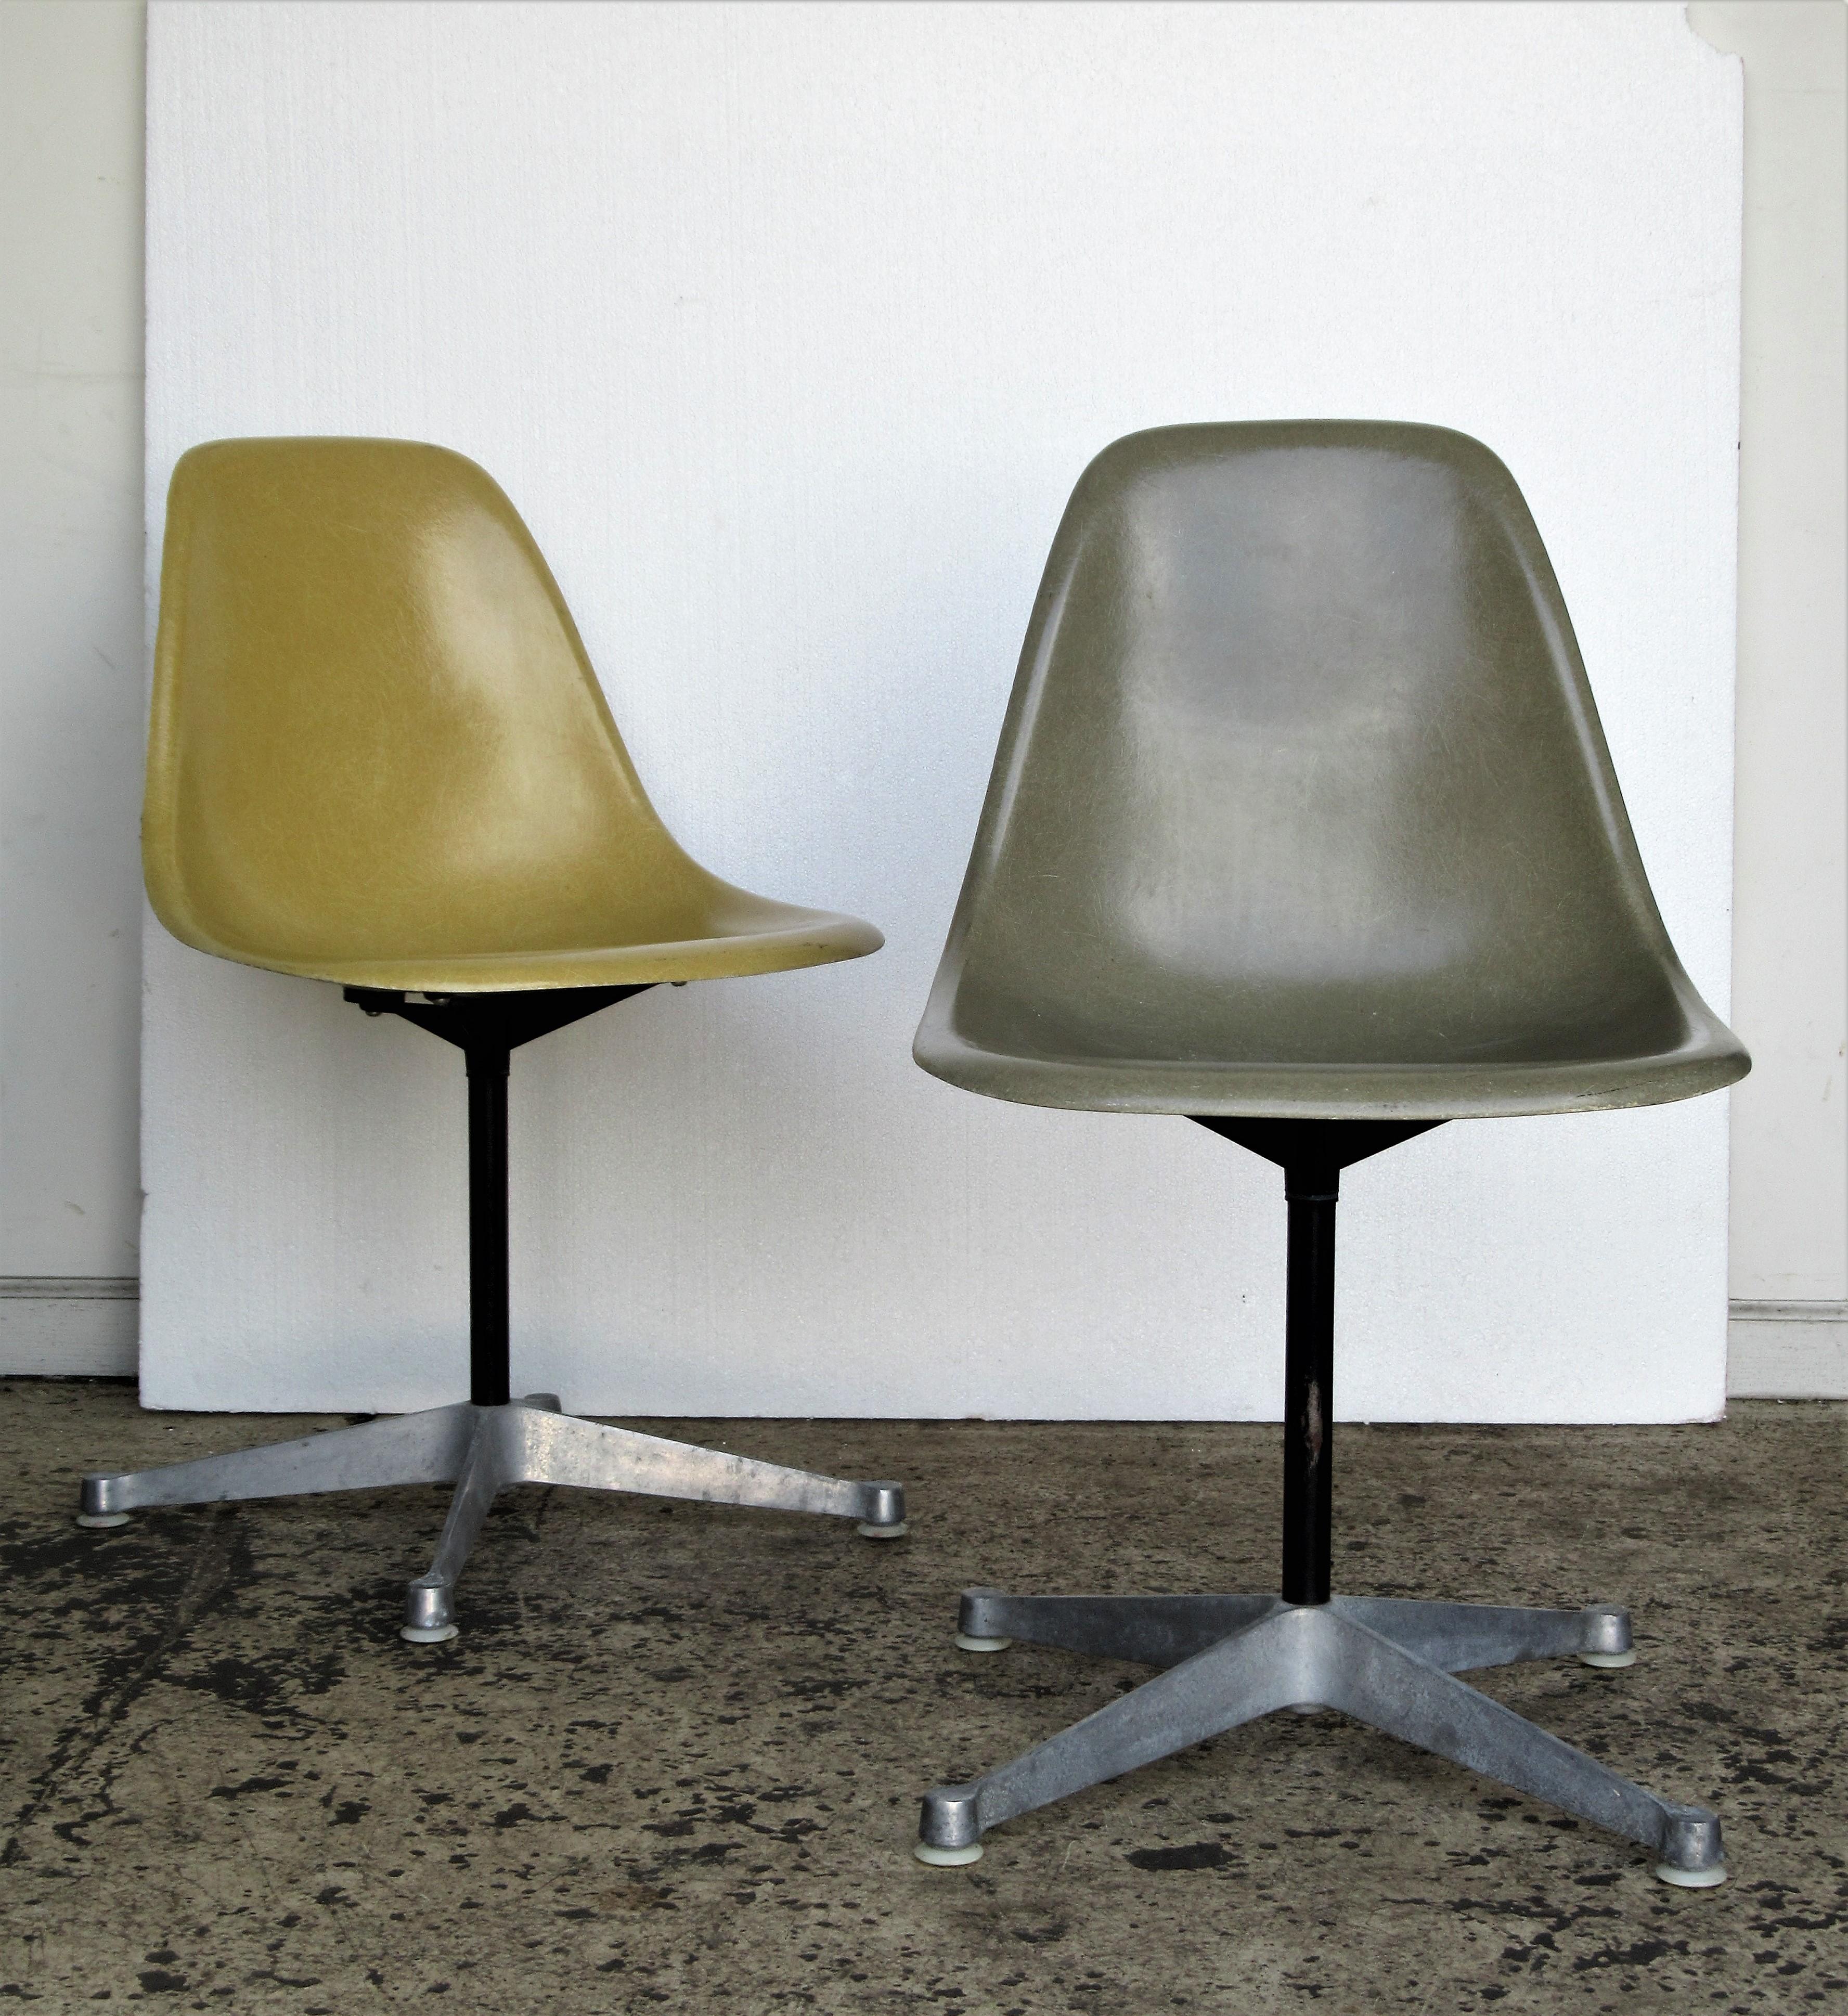 A pair of 100% all original 1960's Charles and Ray Eames fiberglass shell swivel chairs with four star aluminum bases. Both stamped with Herman Miller logo and Cincinnatti Milacron mark. One chair is light ochre yellow the other is the harder to